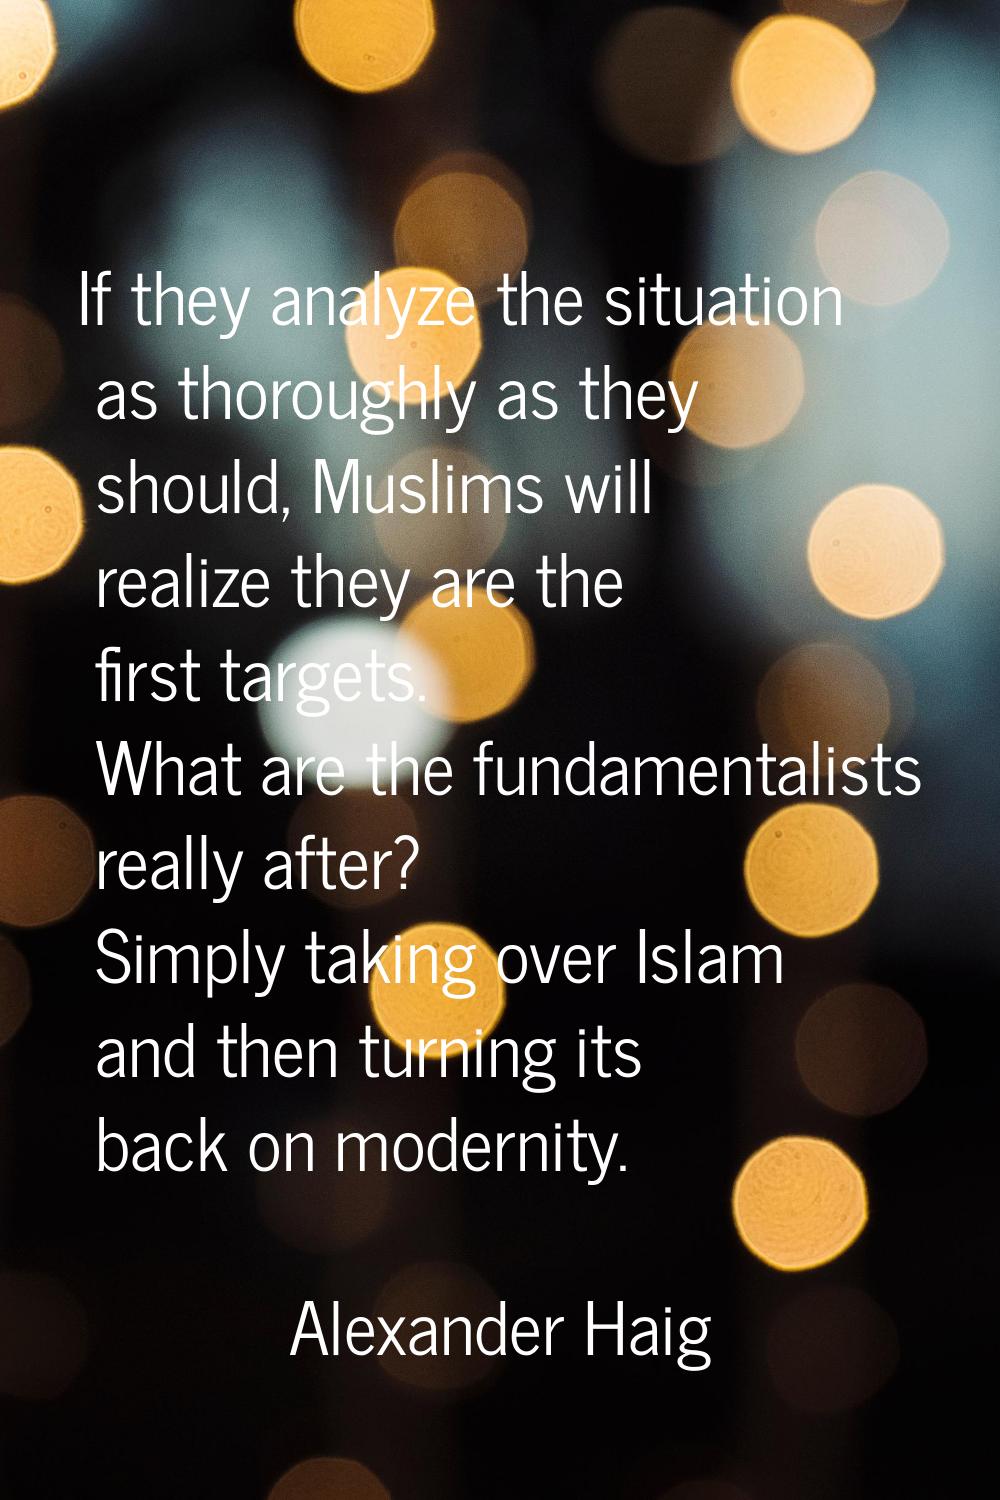 If they analyze the situation as thoroughly as they should, Muslims will realize they are the first